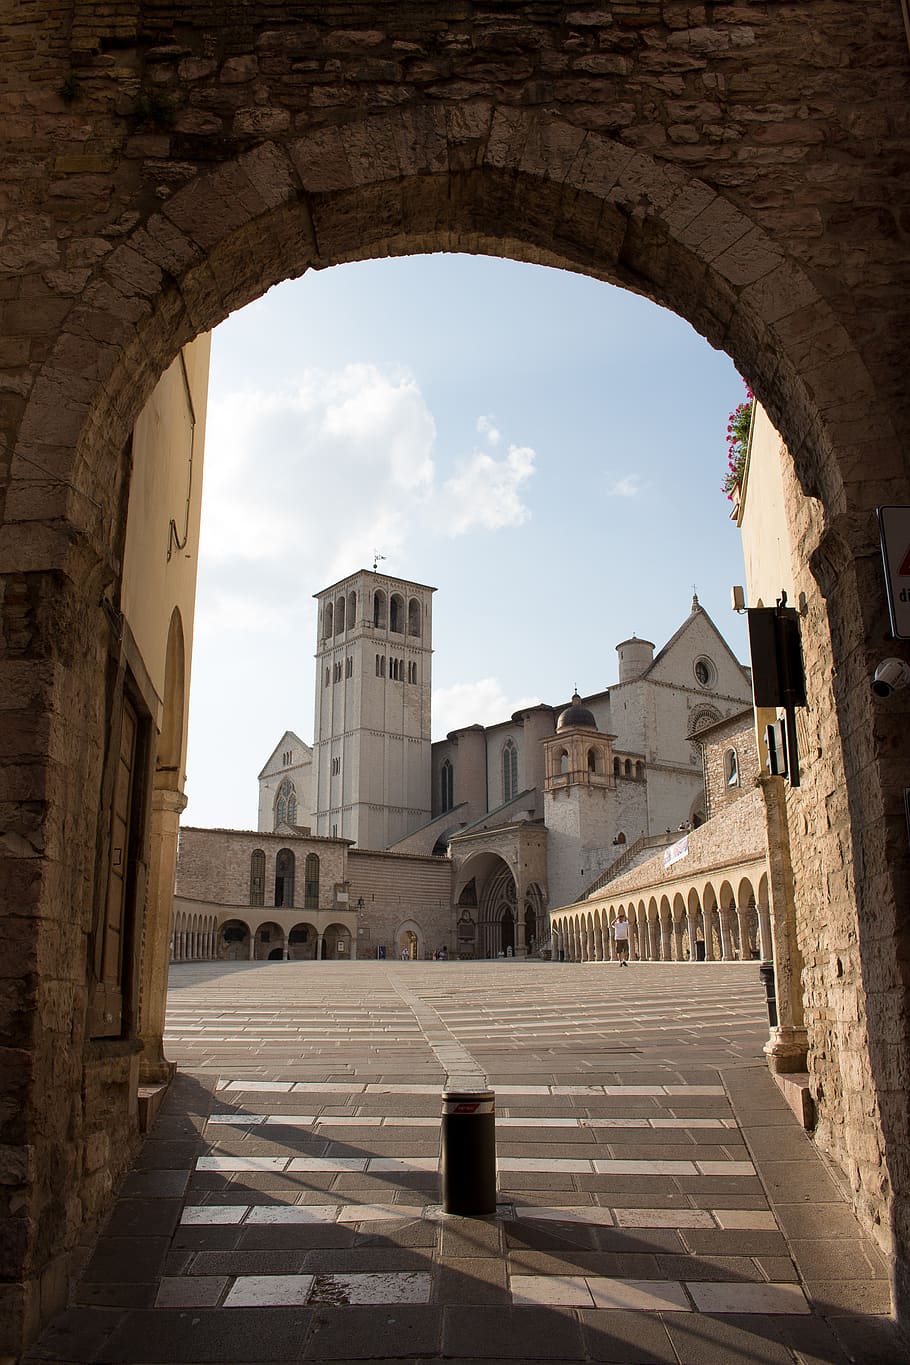 assisi, city, italy, historical, basilica, saint francis, gate, architecture, built structure, arch